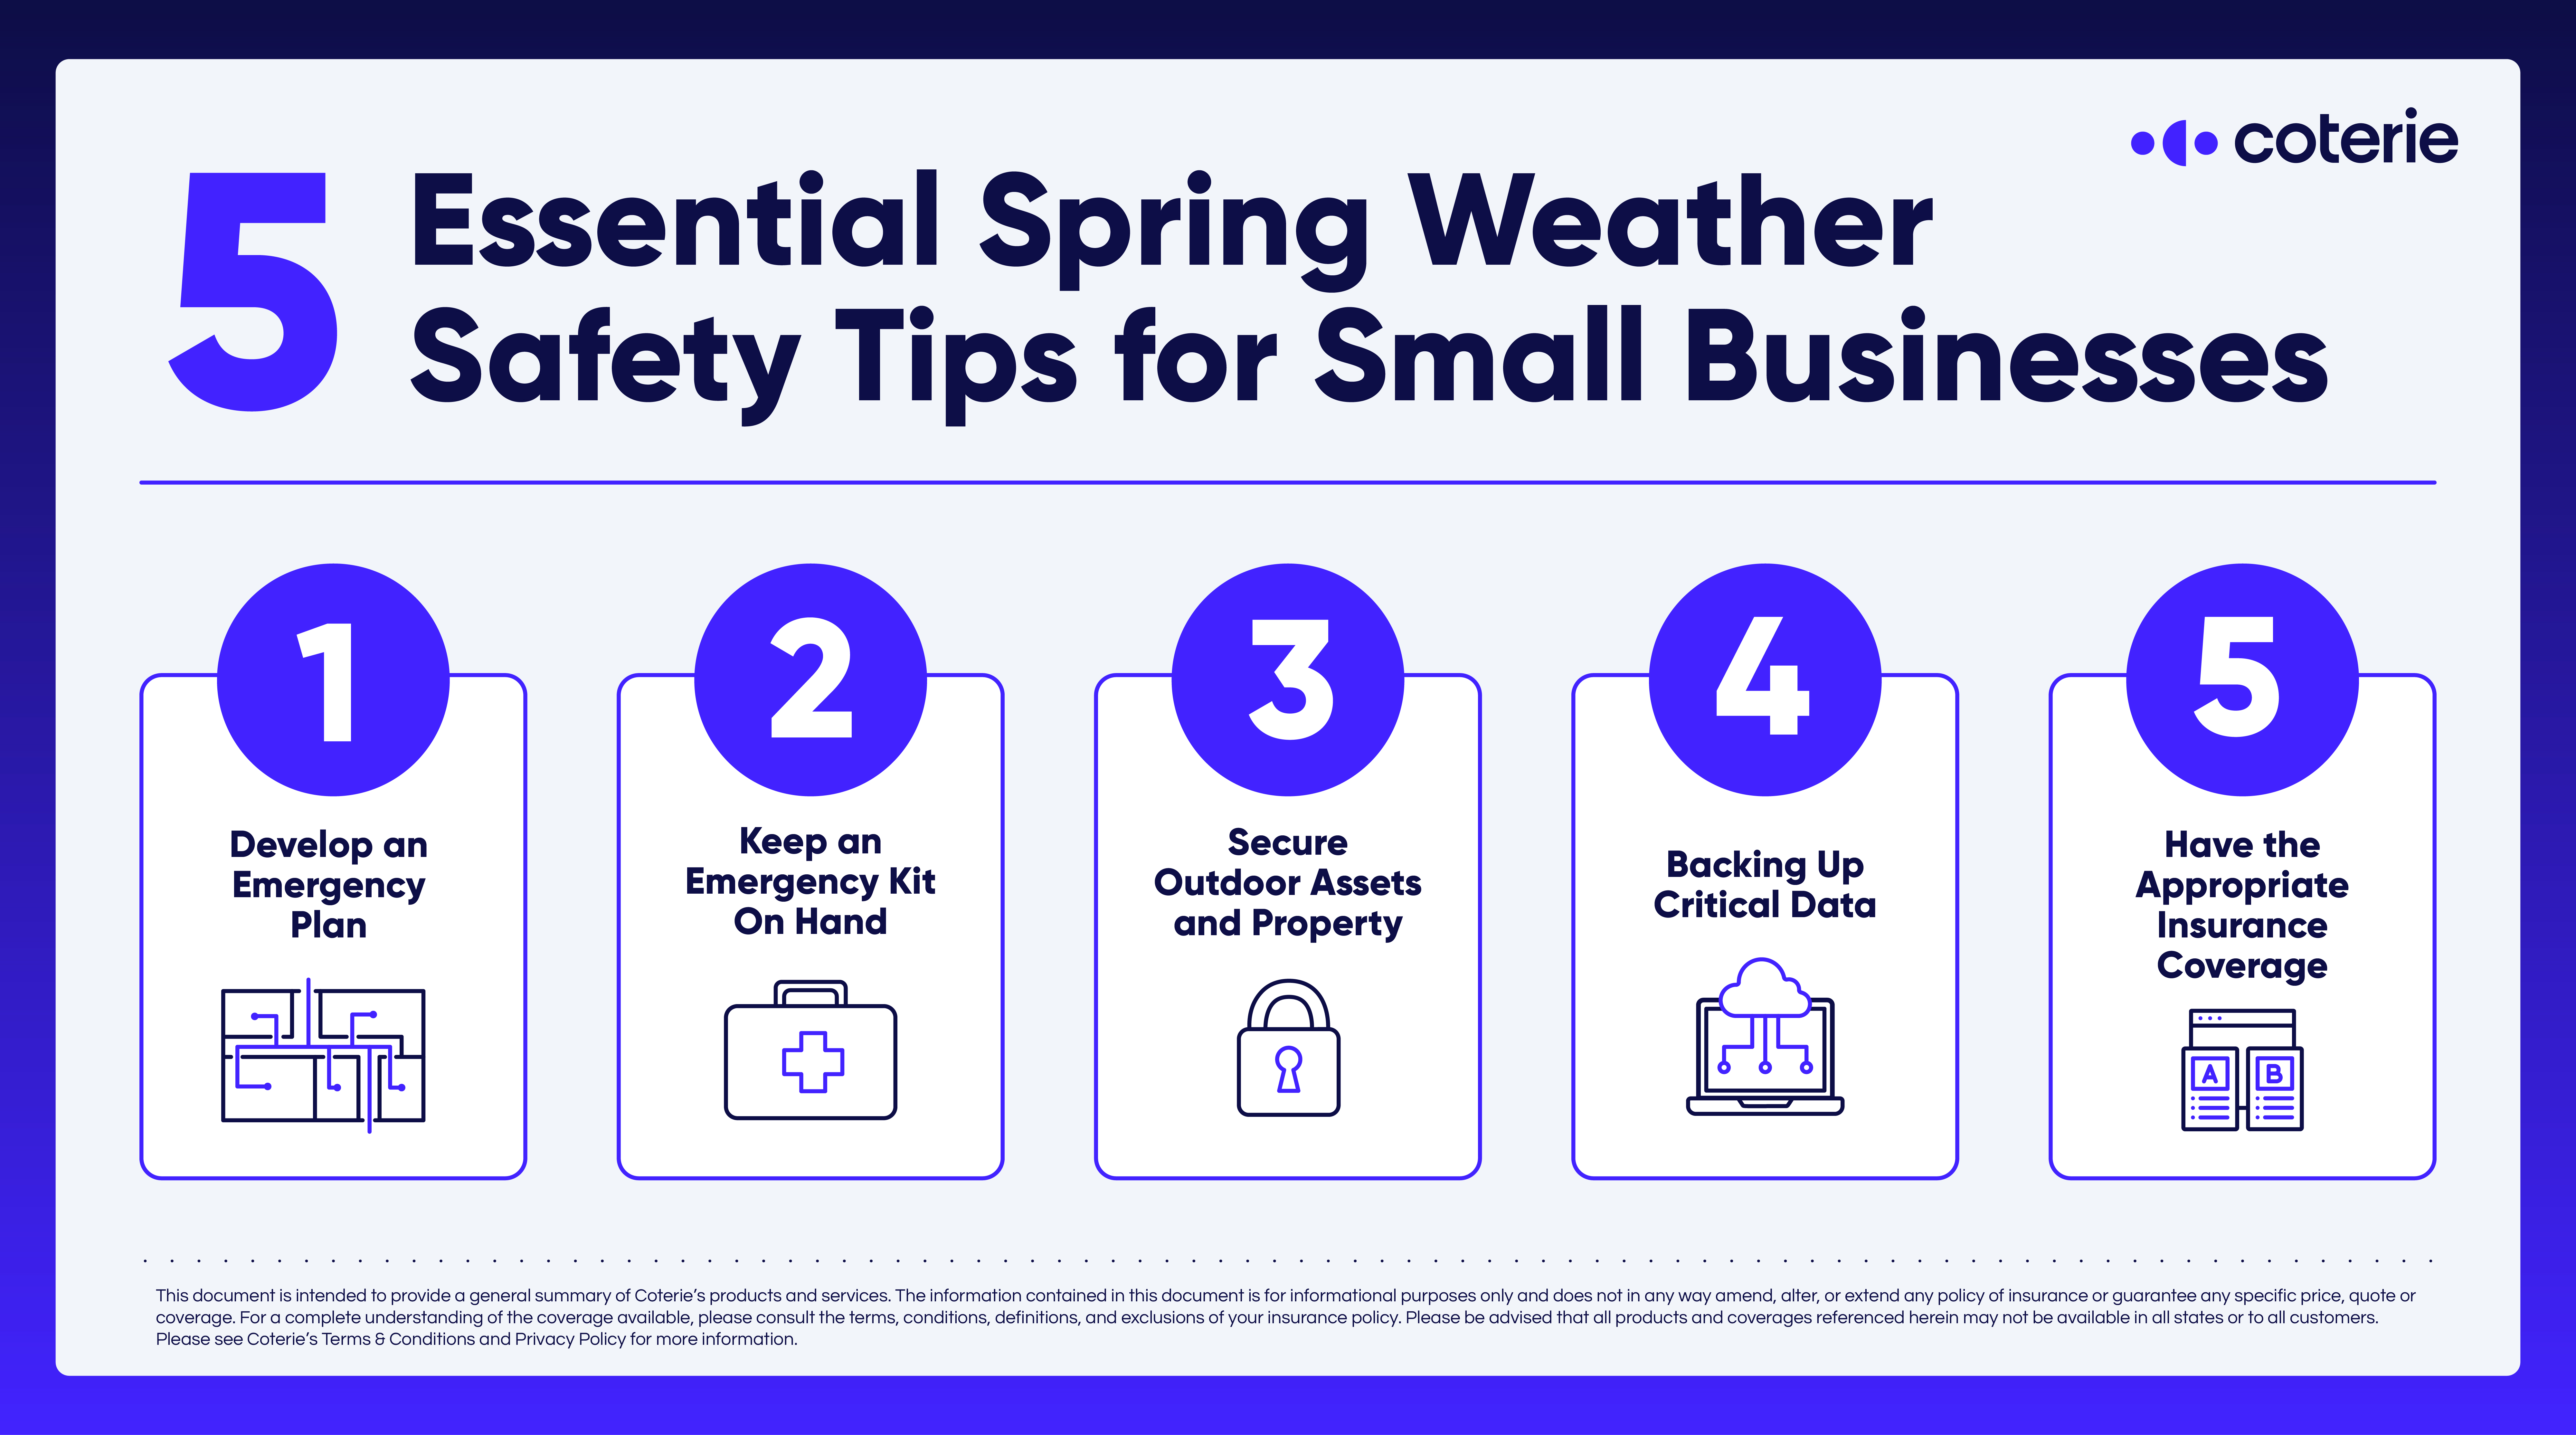 5 Essential Spring Weather Safety Tips for Small Businesses